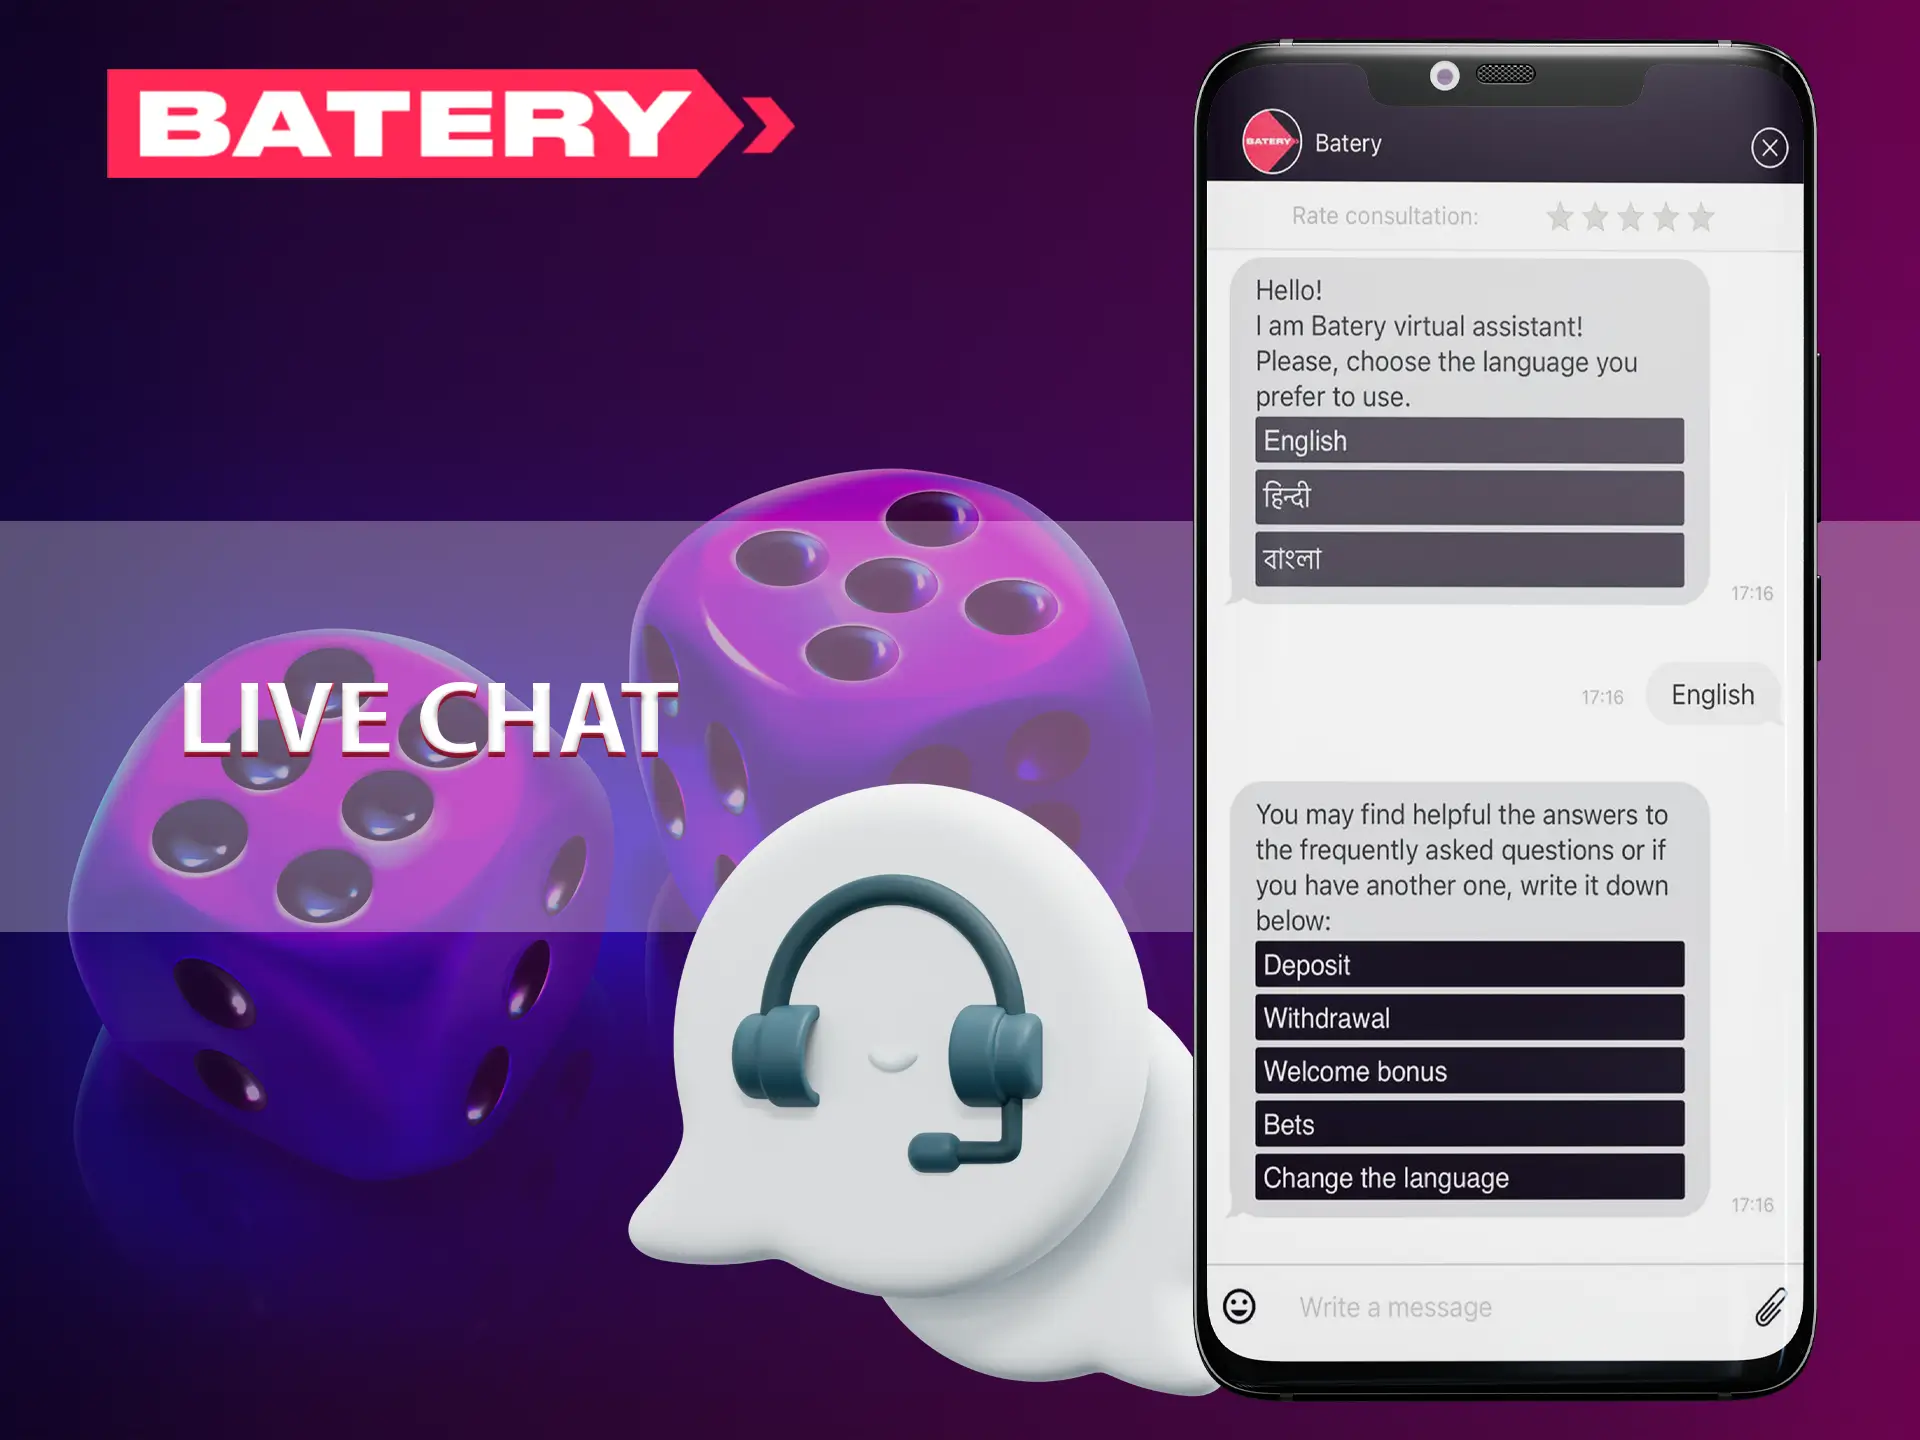 Use Batery support chat in case of difficulties.